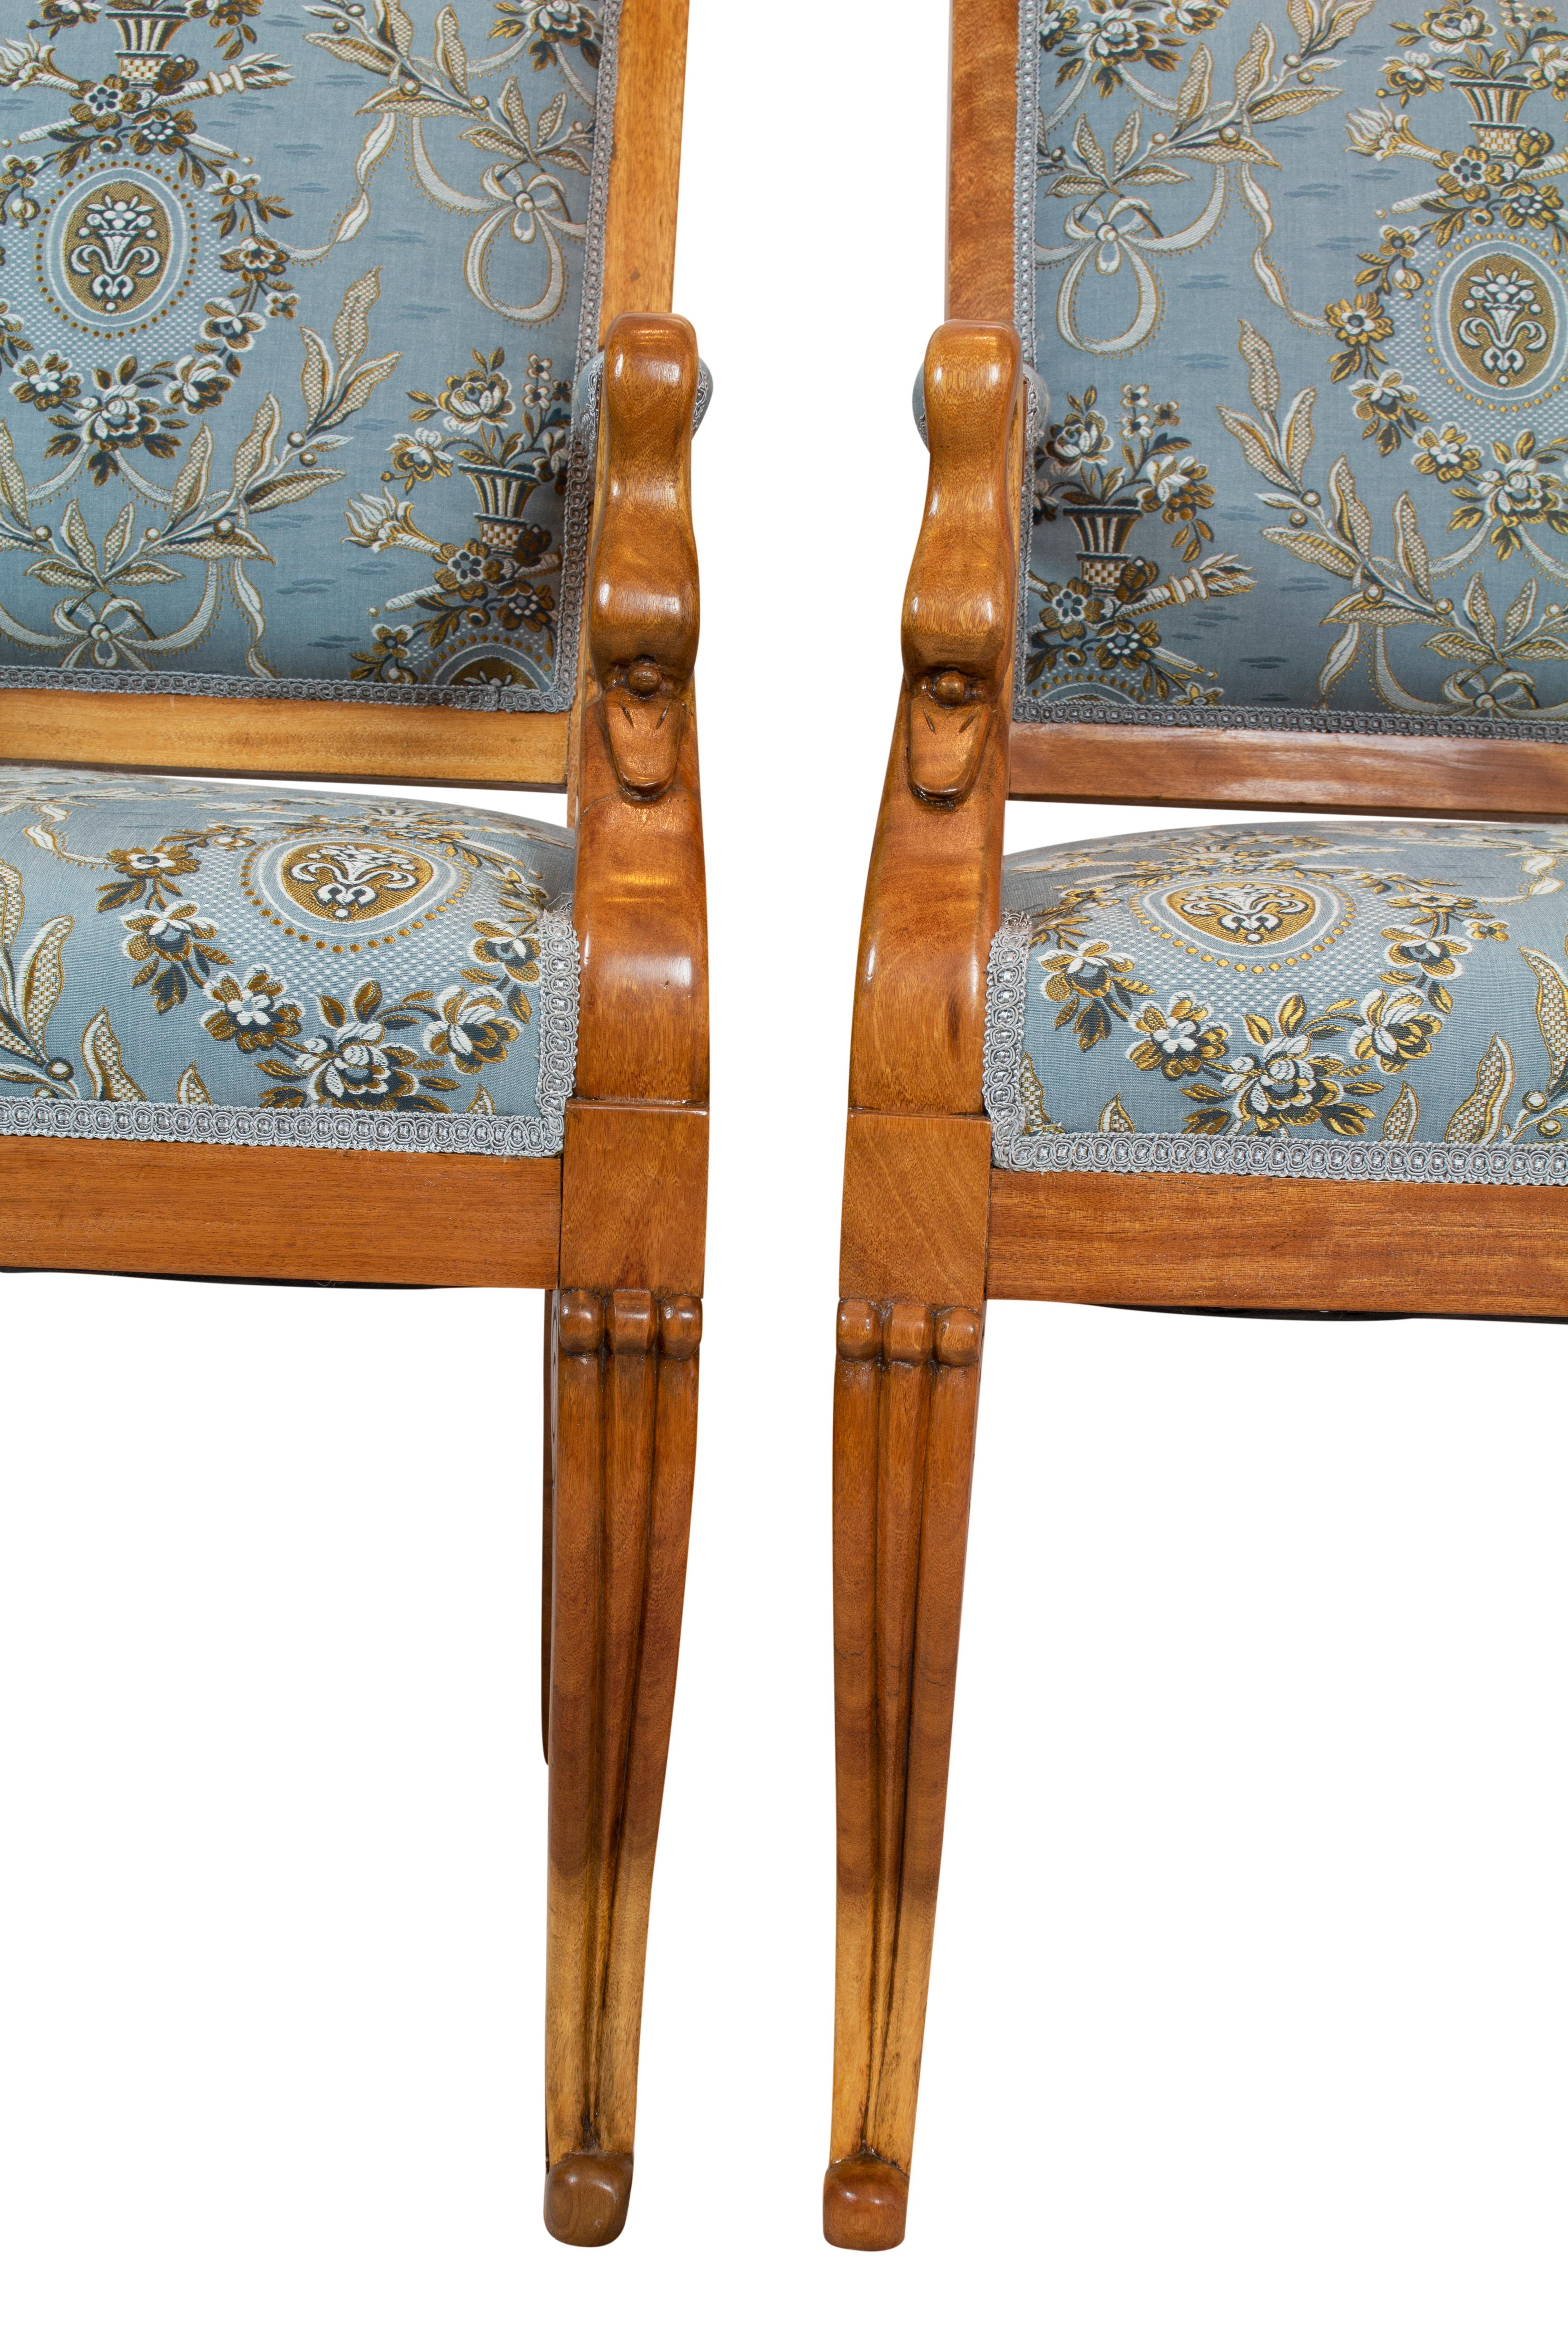 Polished Early 19th Century Pair of Empire / Biedermeier Solid Plum Wood Swan Armchairs For Sale